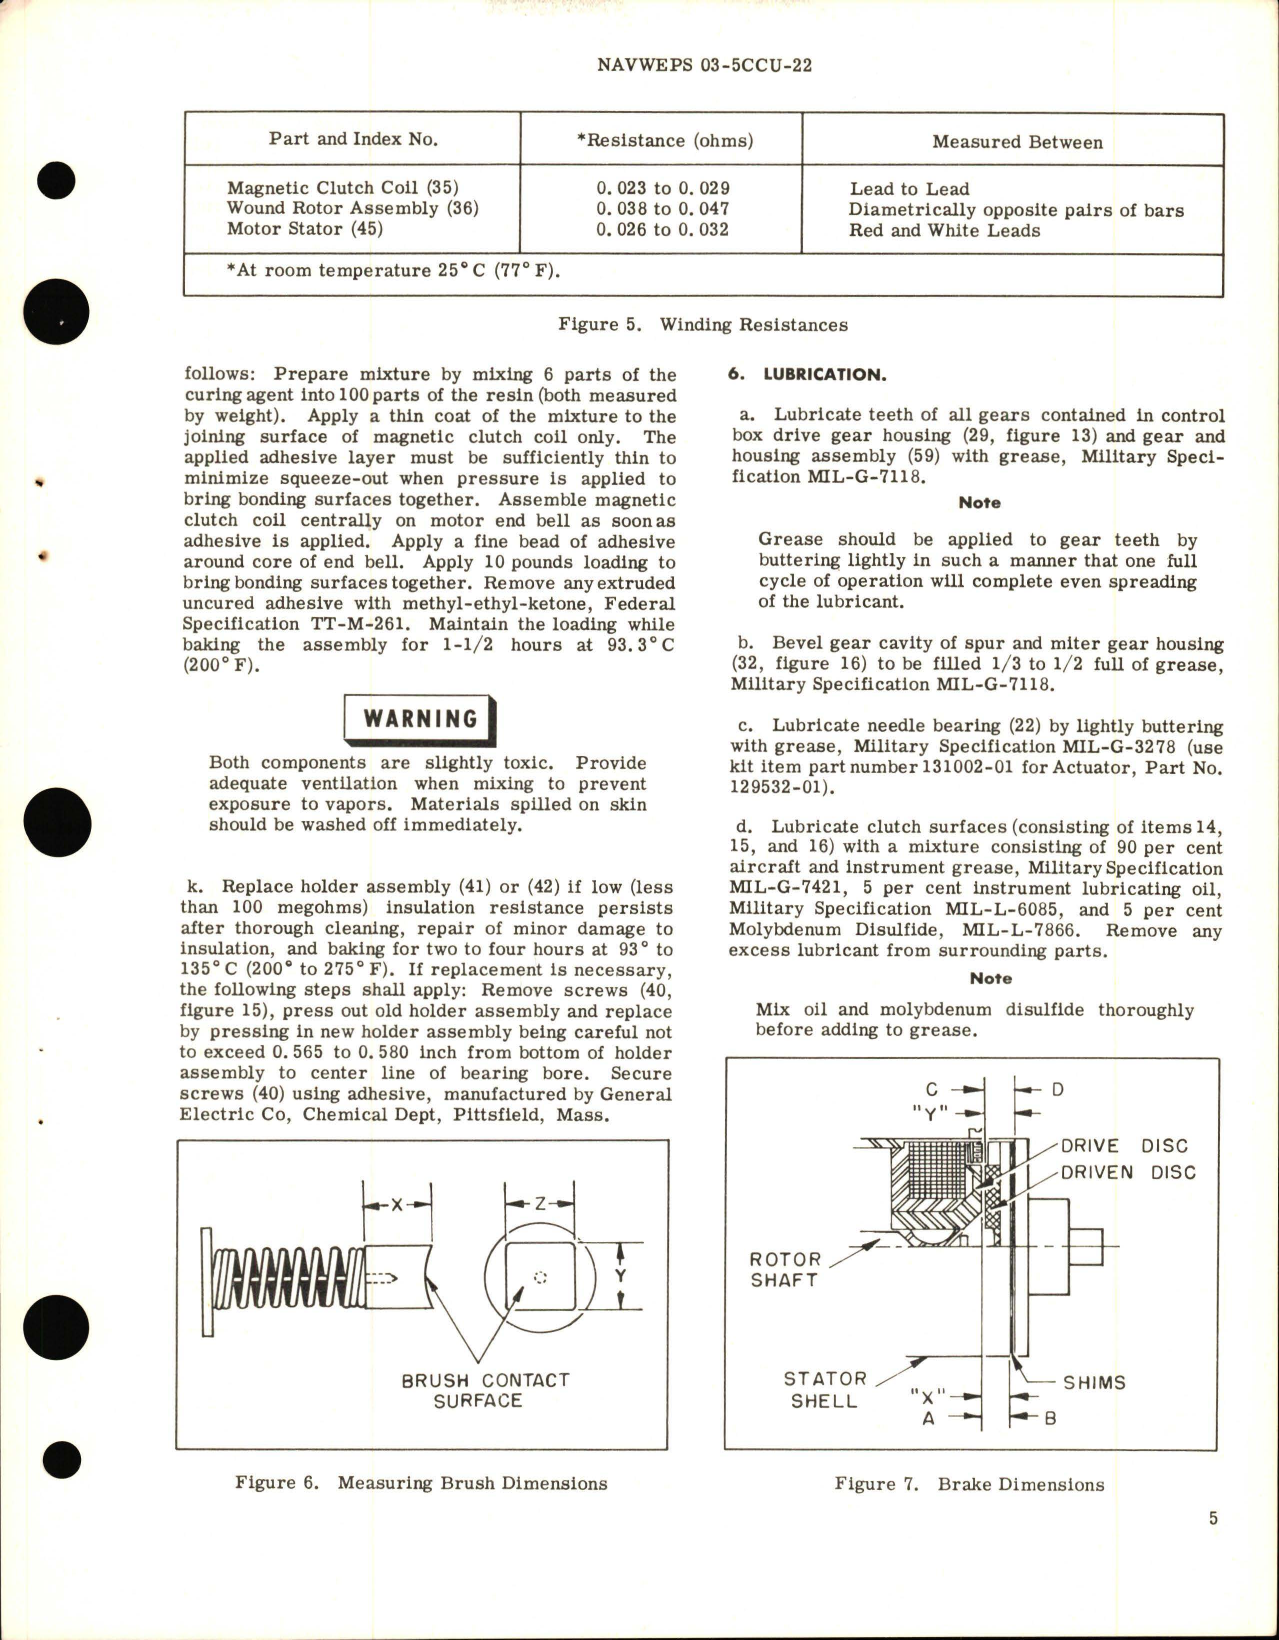 Sample page 7 from AirCorps Library document: Overhaul Instructions with Parts Breakdown for Actuator Motor - Parts 129532-01 and 129532-03 